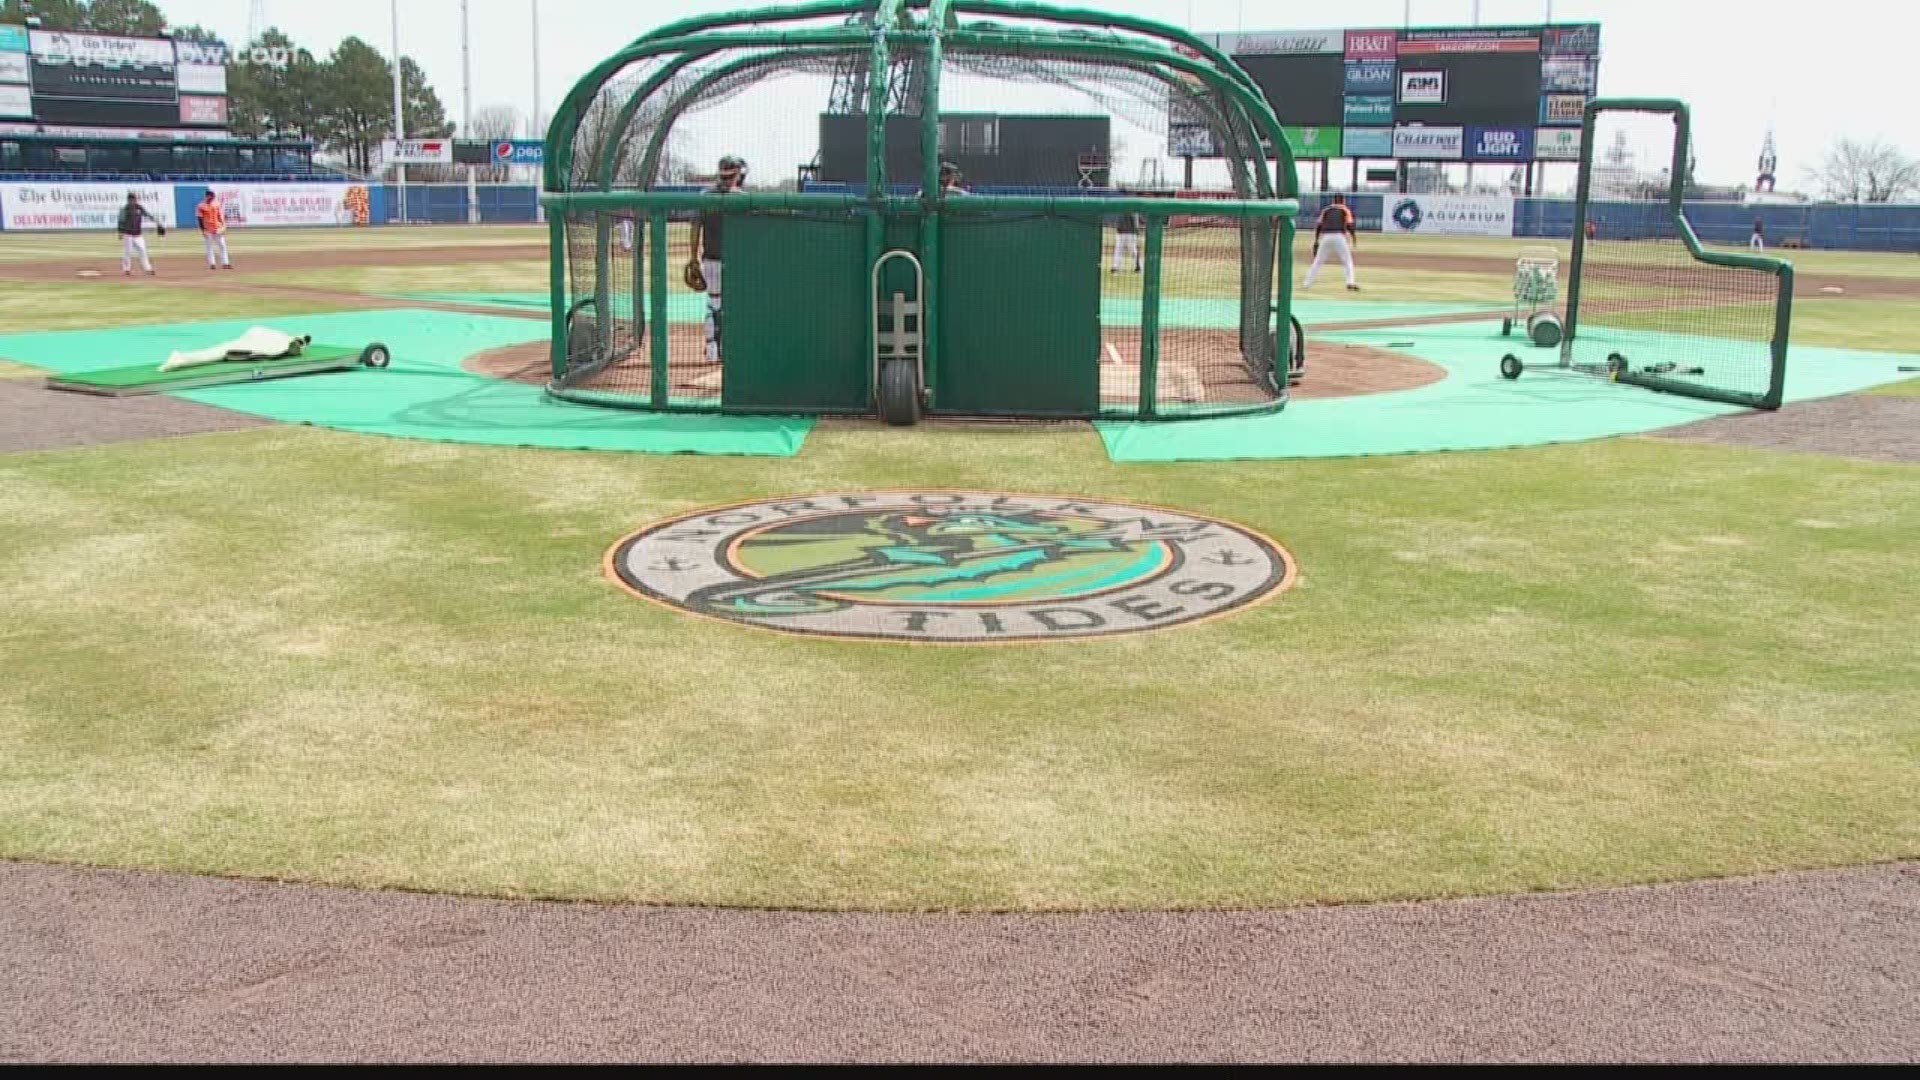 Spring training is over. Let's play ball. The Norfolk Tides had their first workout at Harbor Park before their opener on Friday.